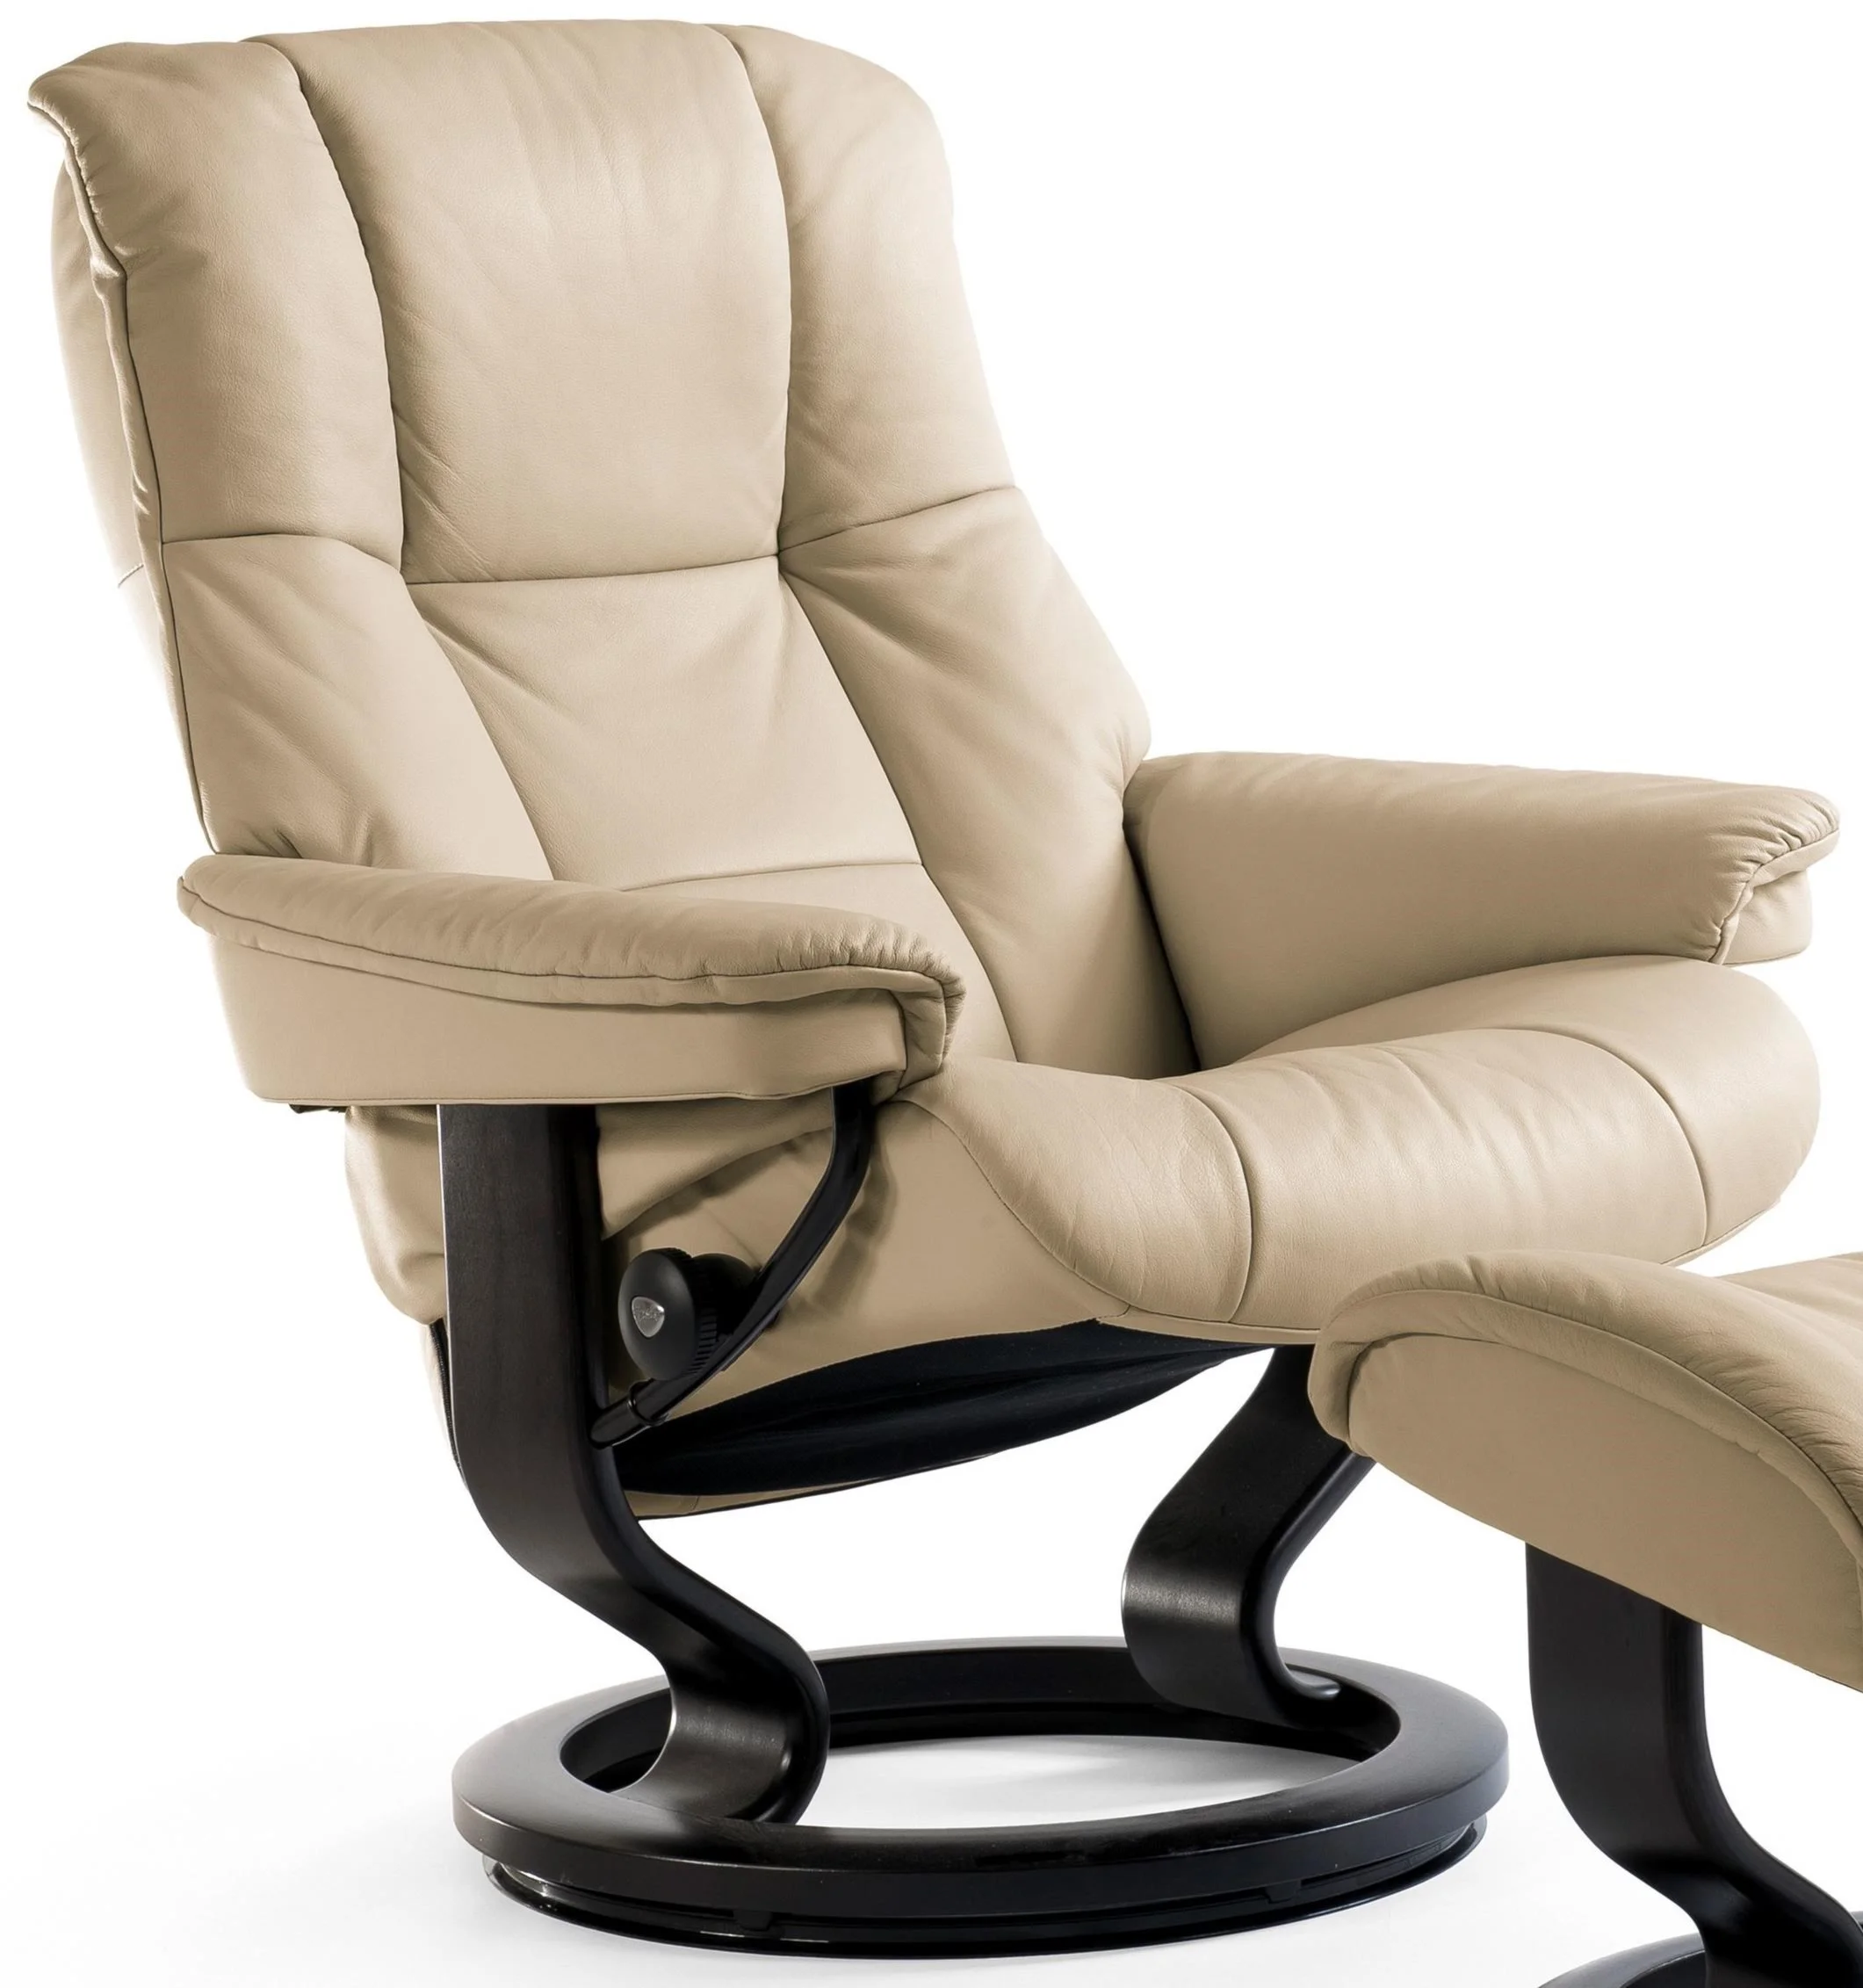 Stressless by Ekornes Mayfair Large Reclining Chair with Classic Base |  Sprintz Furniture | Recliner - Three Way